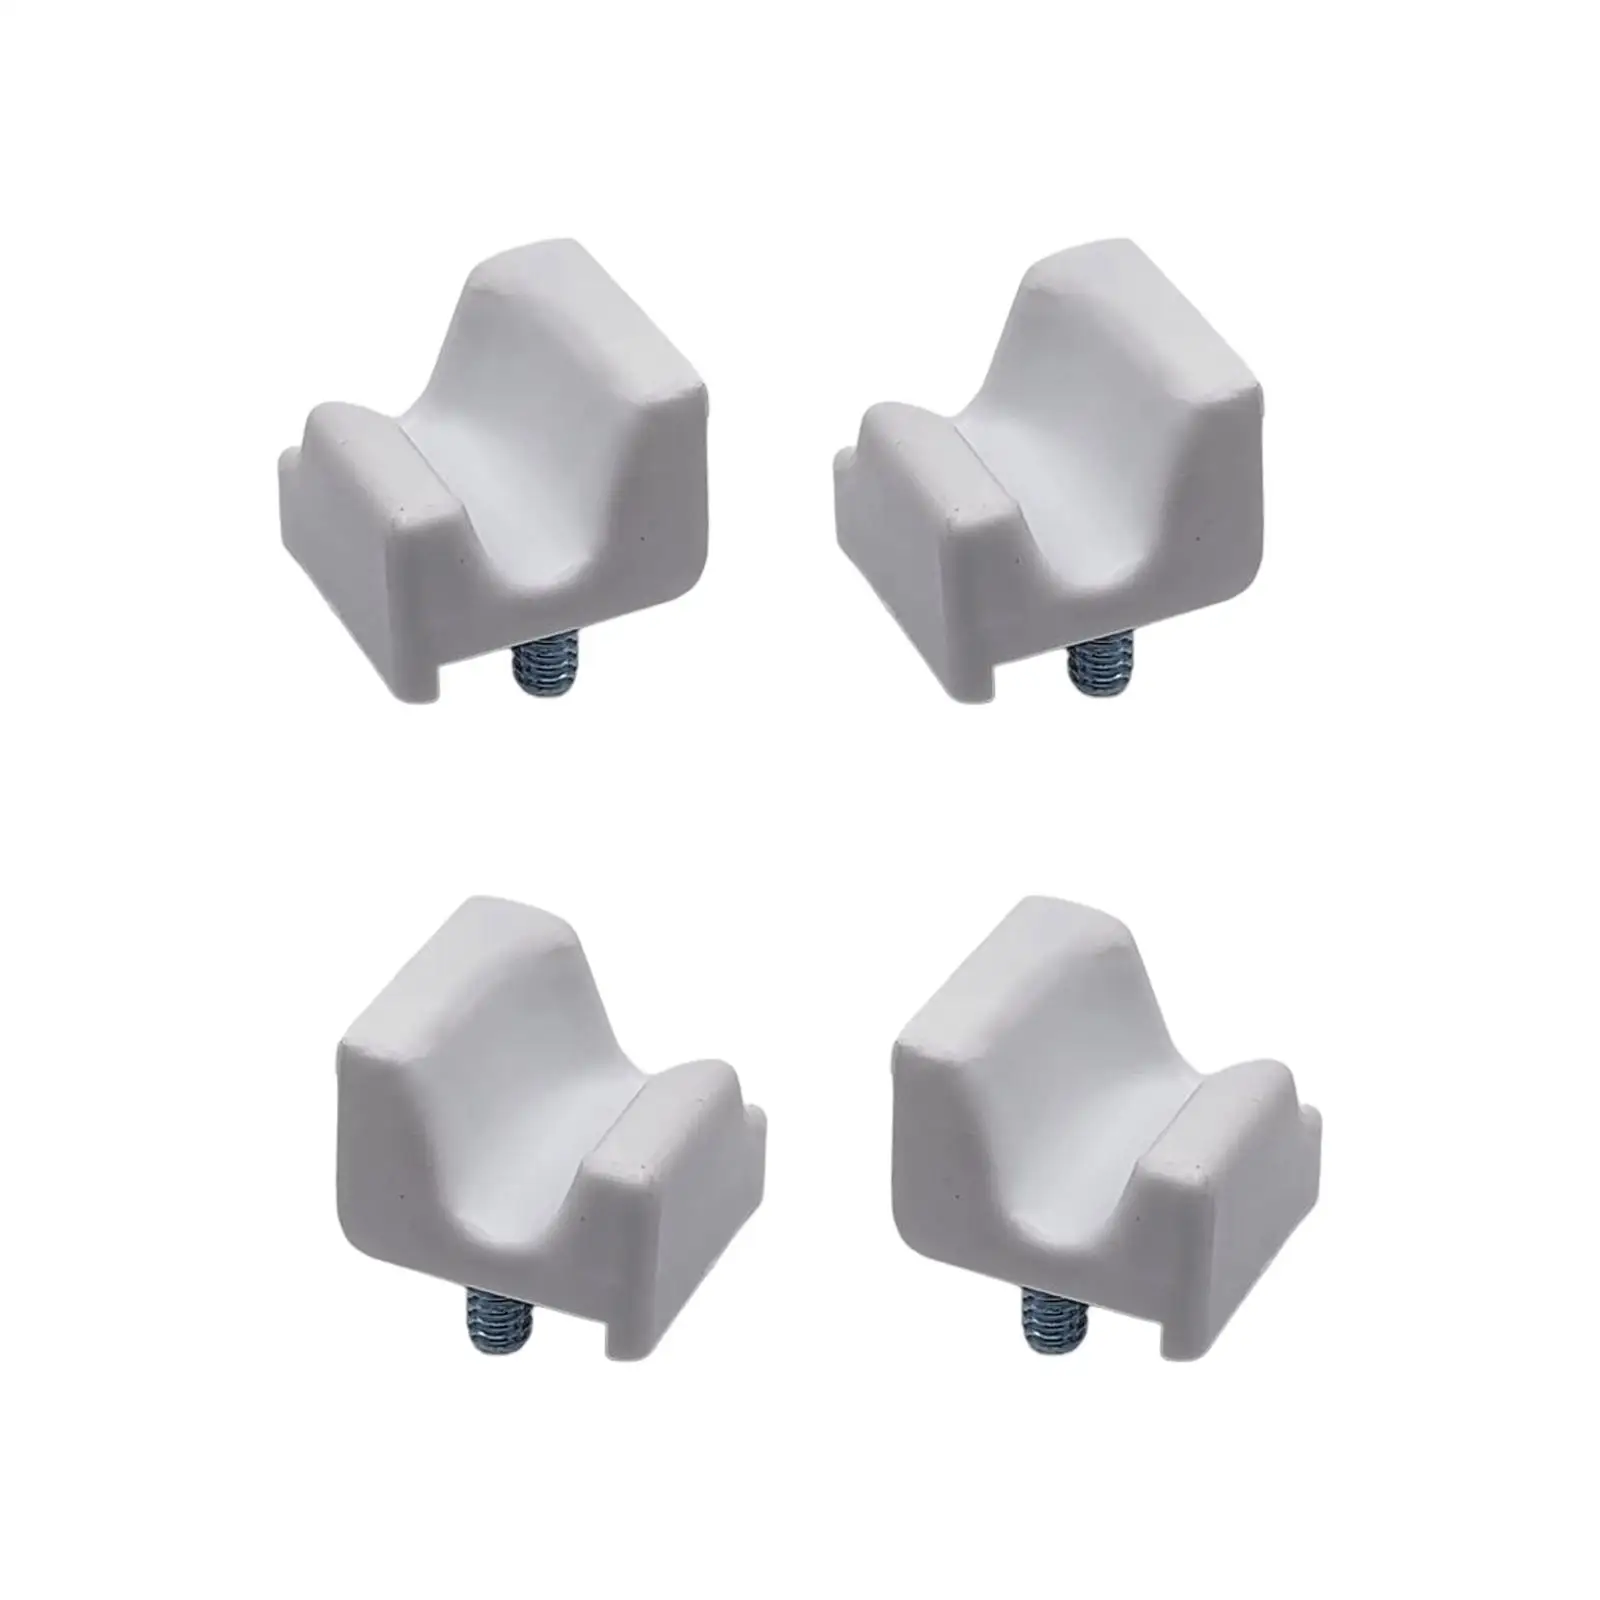 4x Freezer Basket Retainers #7009399 2 Left 2 Right for 611 611G Accessories Replacement Part